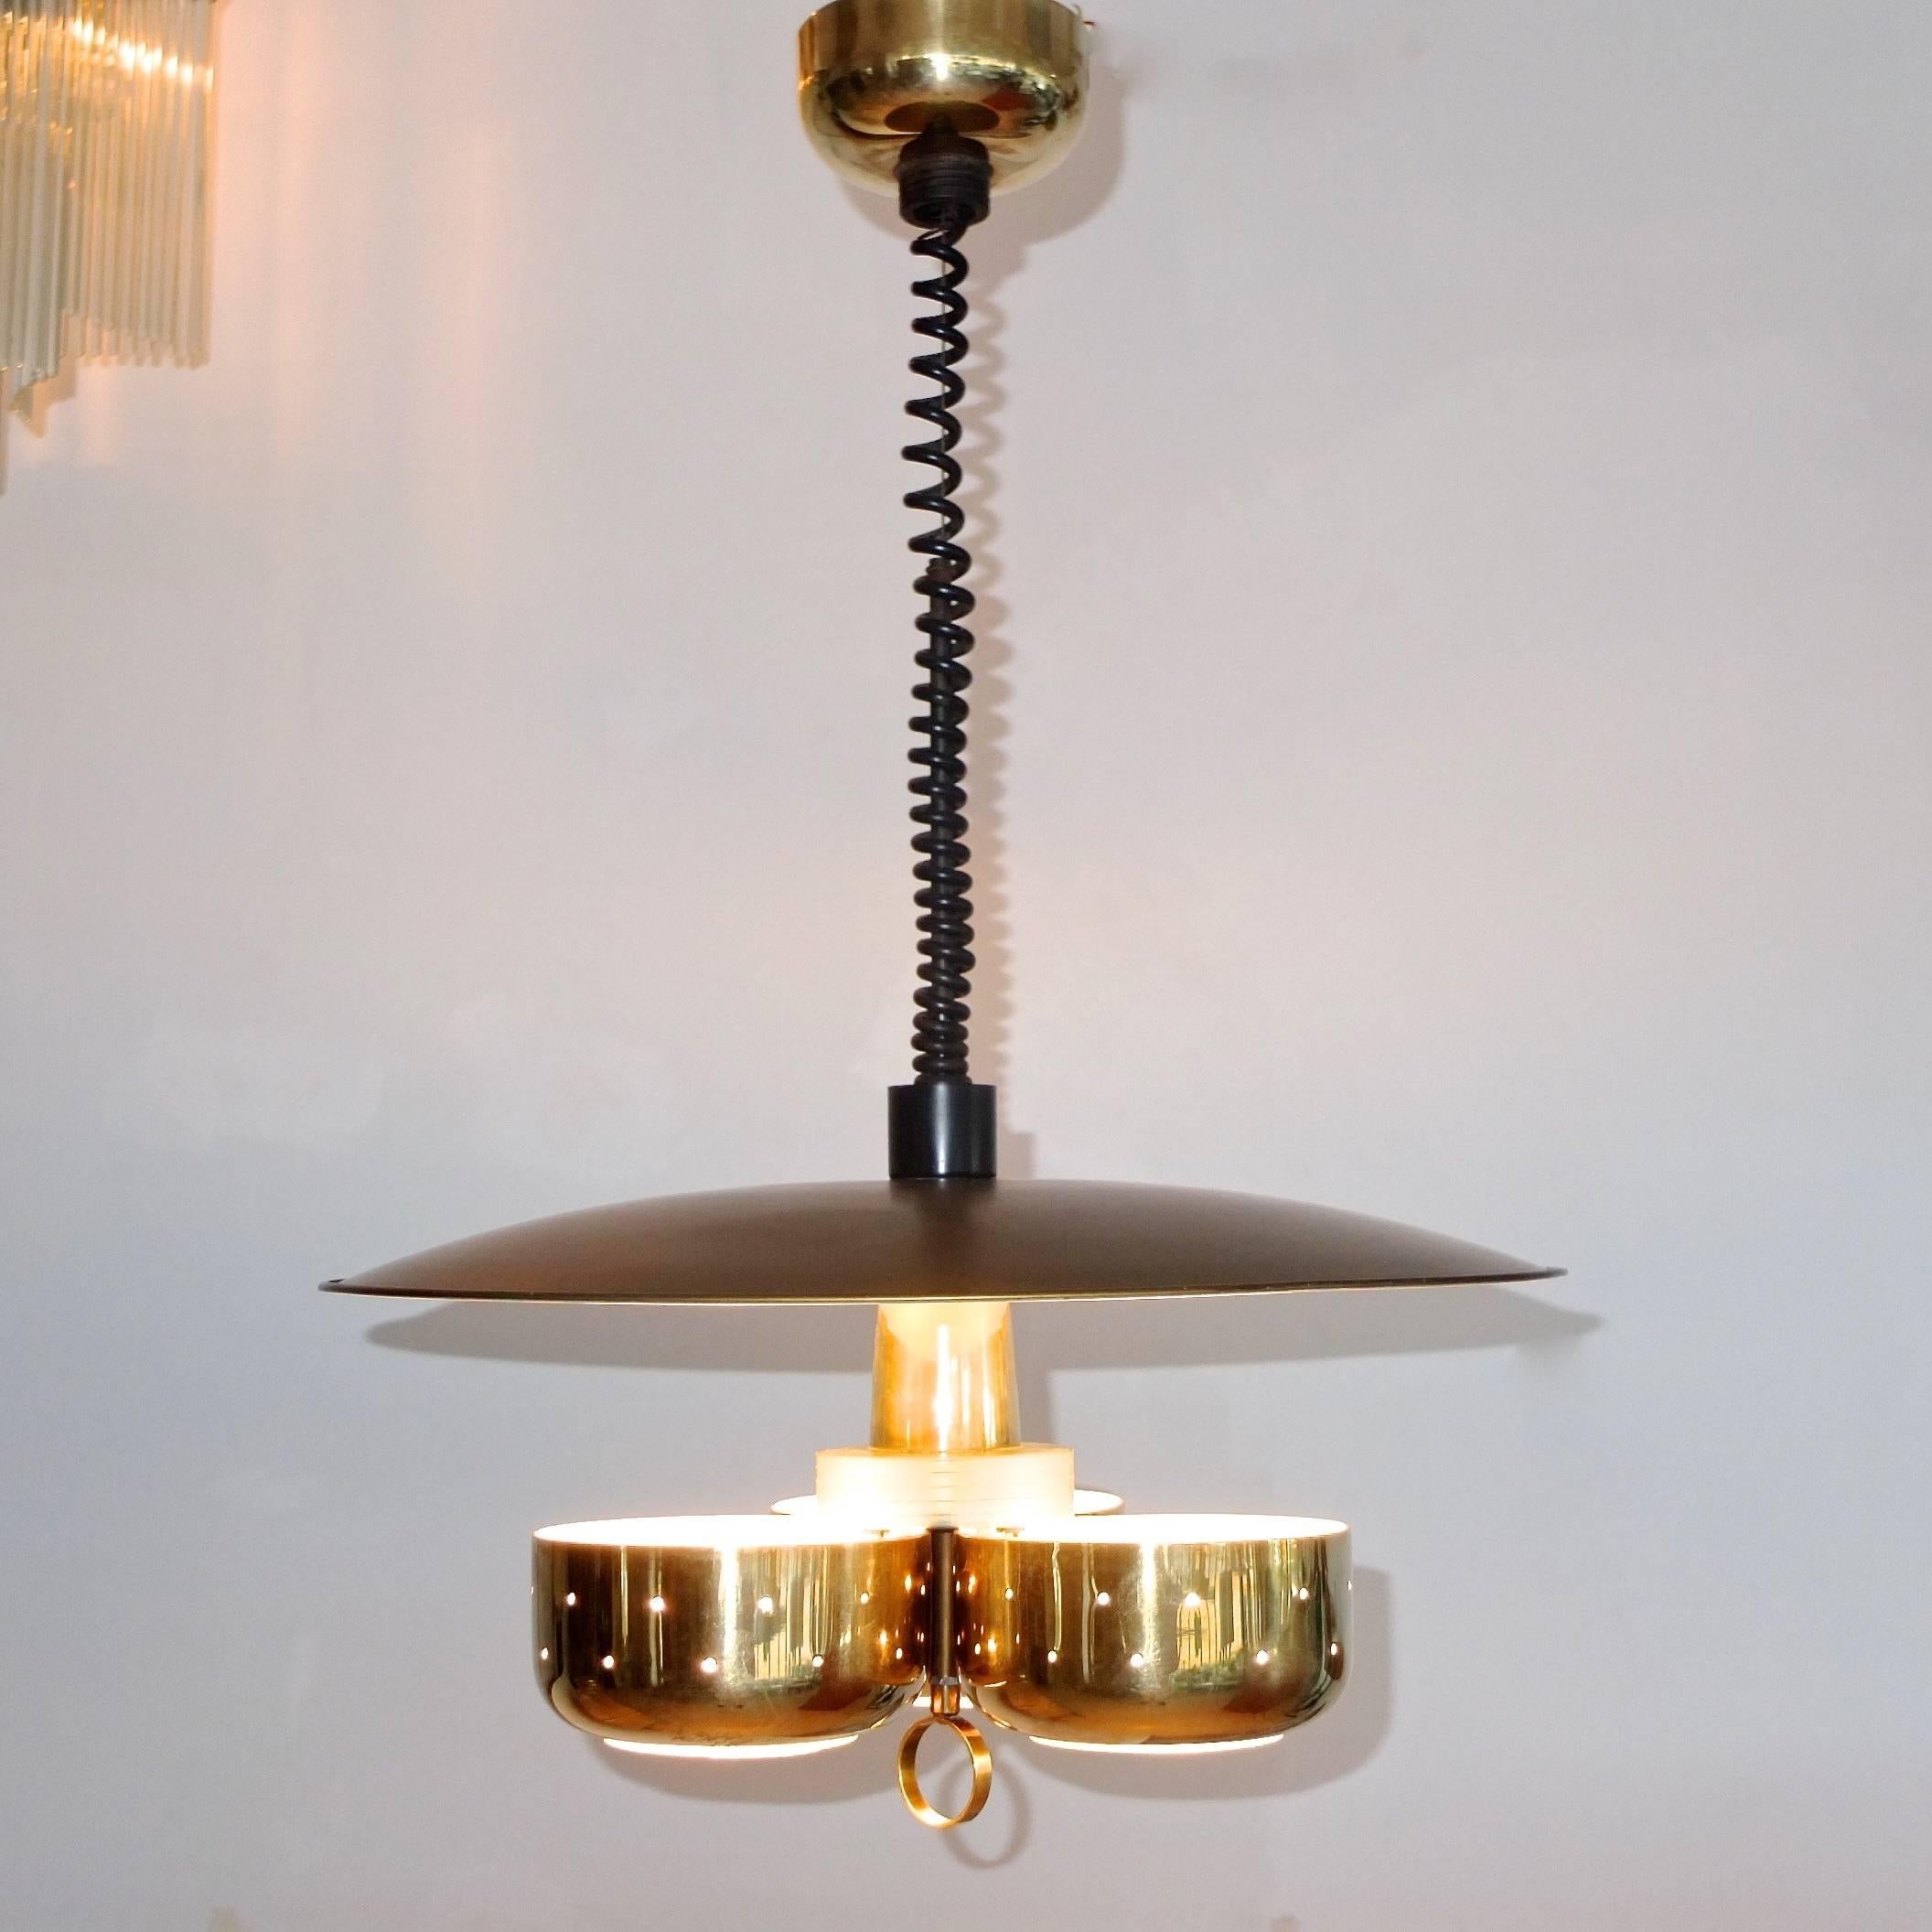 SATURDAY SALE Boston Design Center

Original Lightolier pendant, circa 1958 designed by Gerald Thurston who was clearly influenced by Gino Sarfatti and Gaetano Sciolari.
This pendant provides both down and diffused uplighting by Virtue of the three